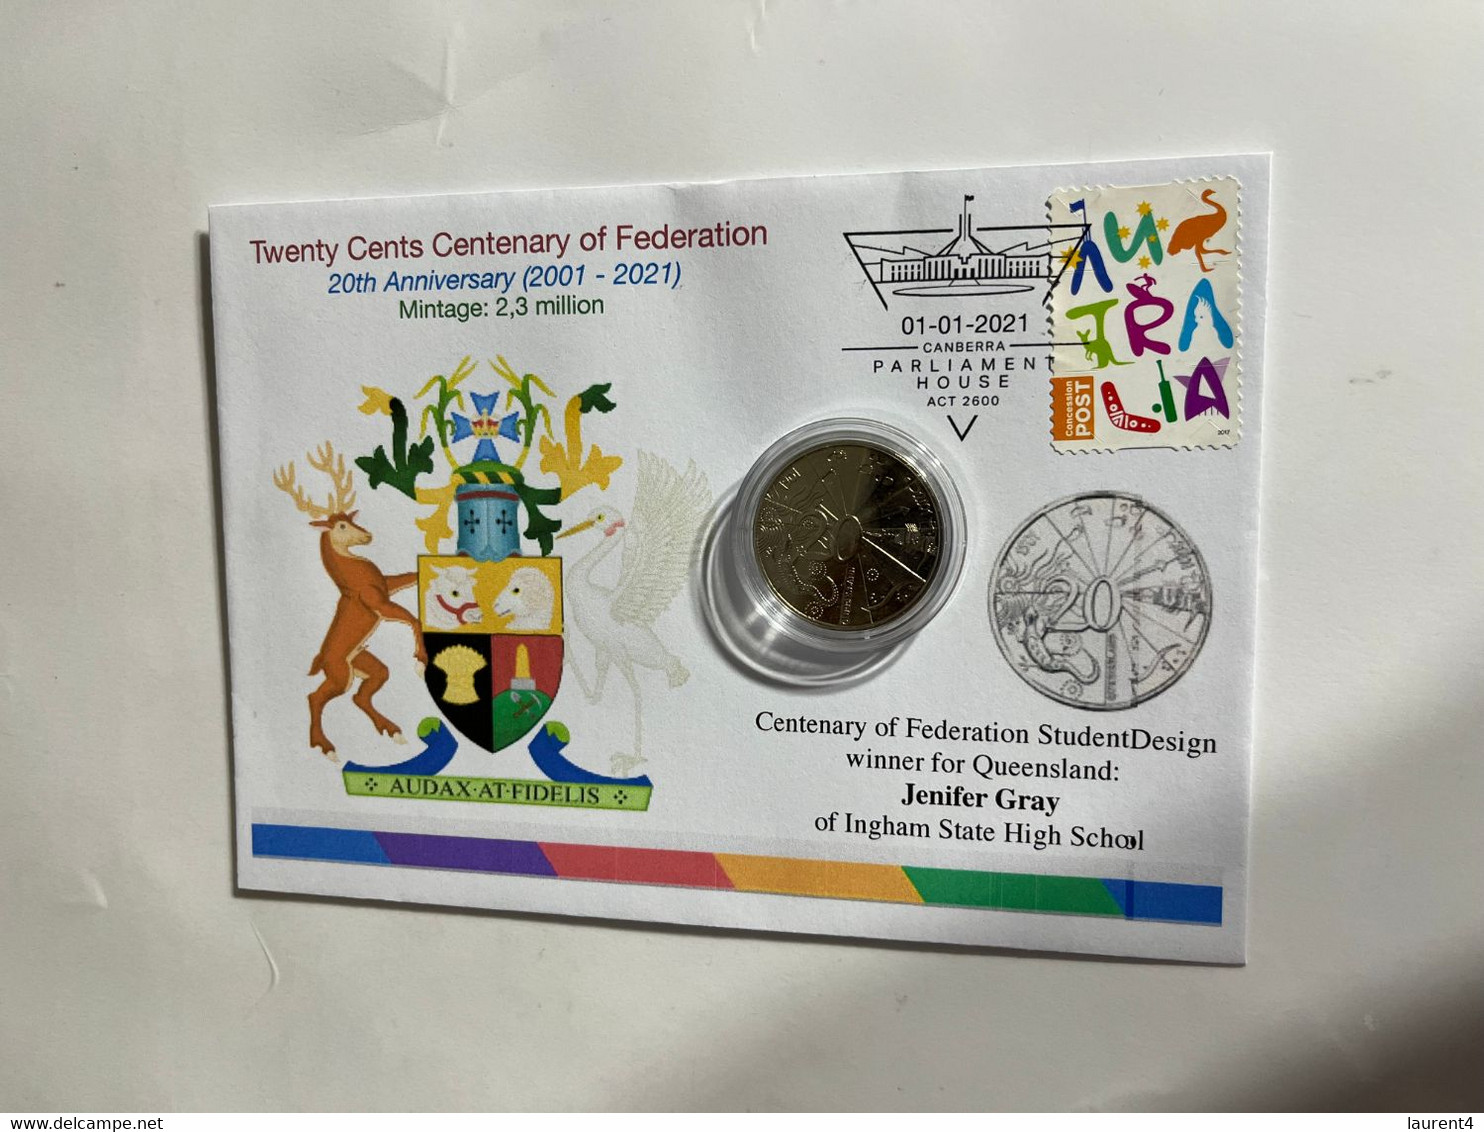 (1 N 18) 20 Cent "Scarce" Coin - 20th Anniversary - Queensland - Centenary Of Federation Coin (20th Anni. Cover) - 20 Cents